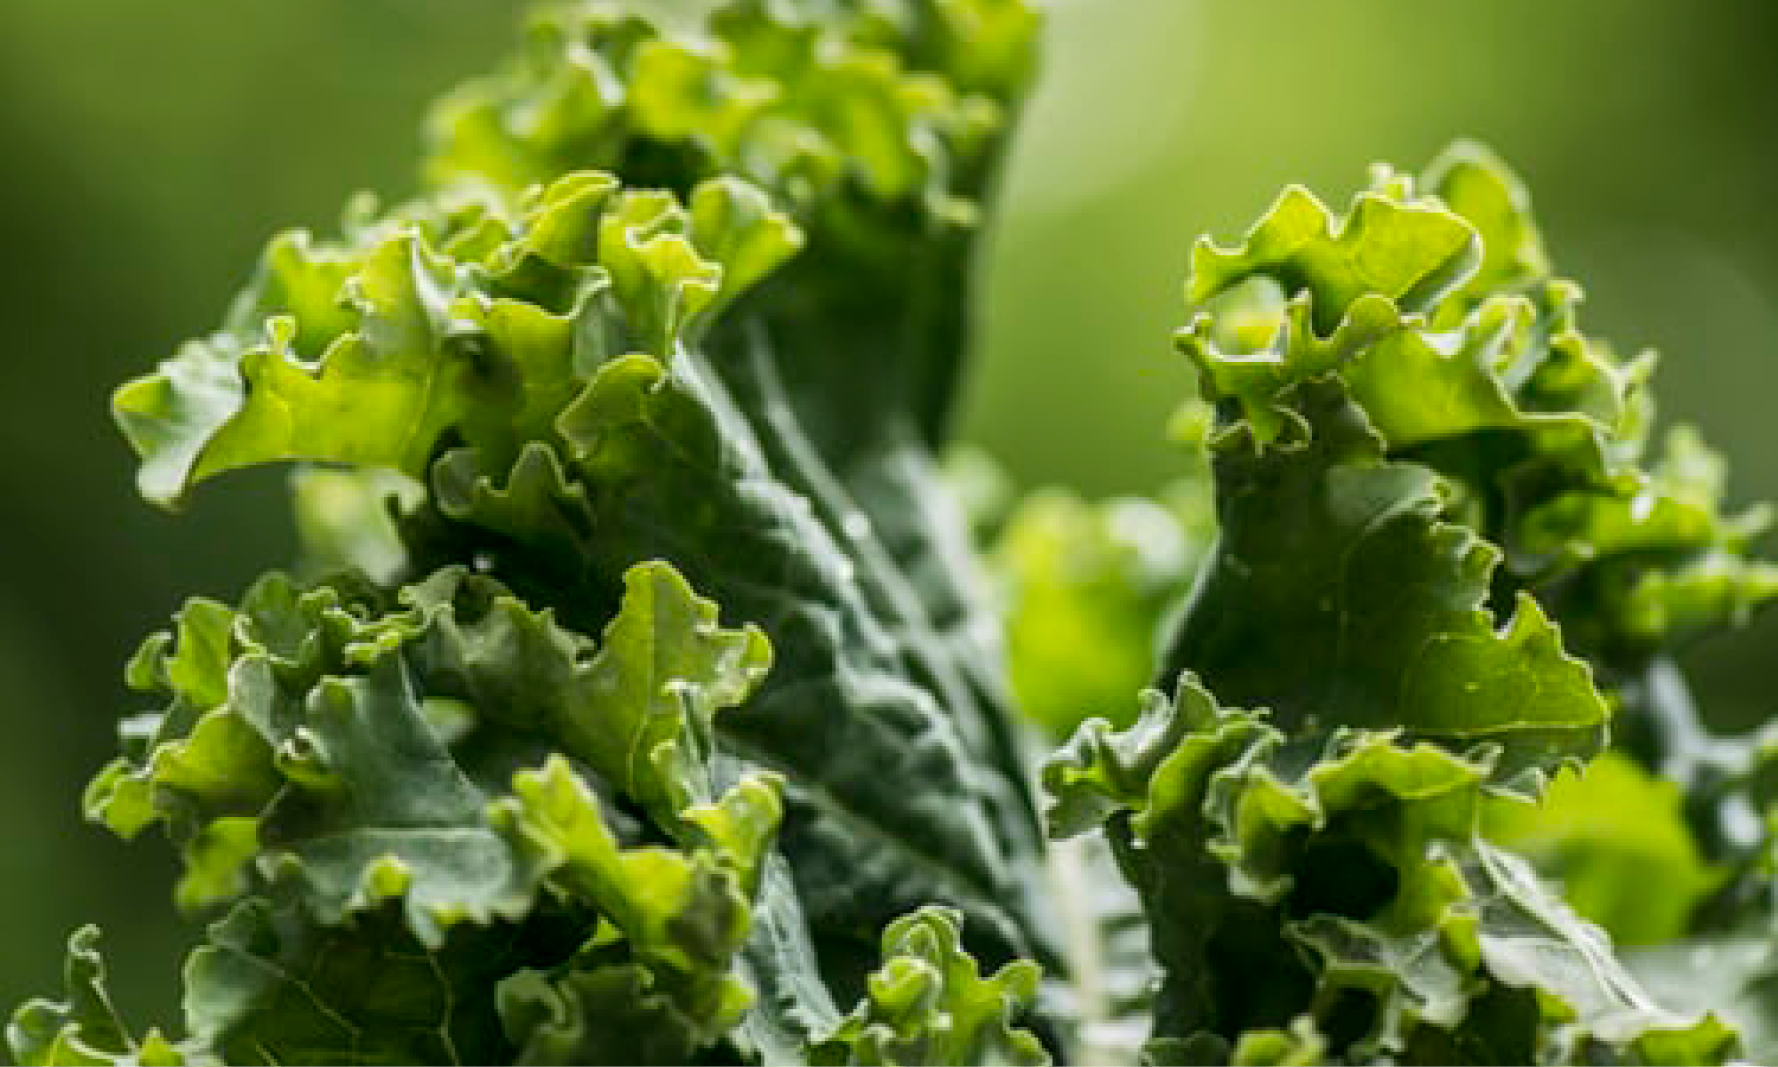 Super superfood: Kale | %%sitename%% | Strenghten your immune system